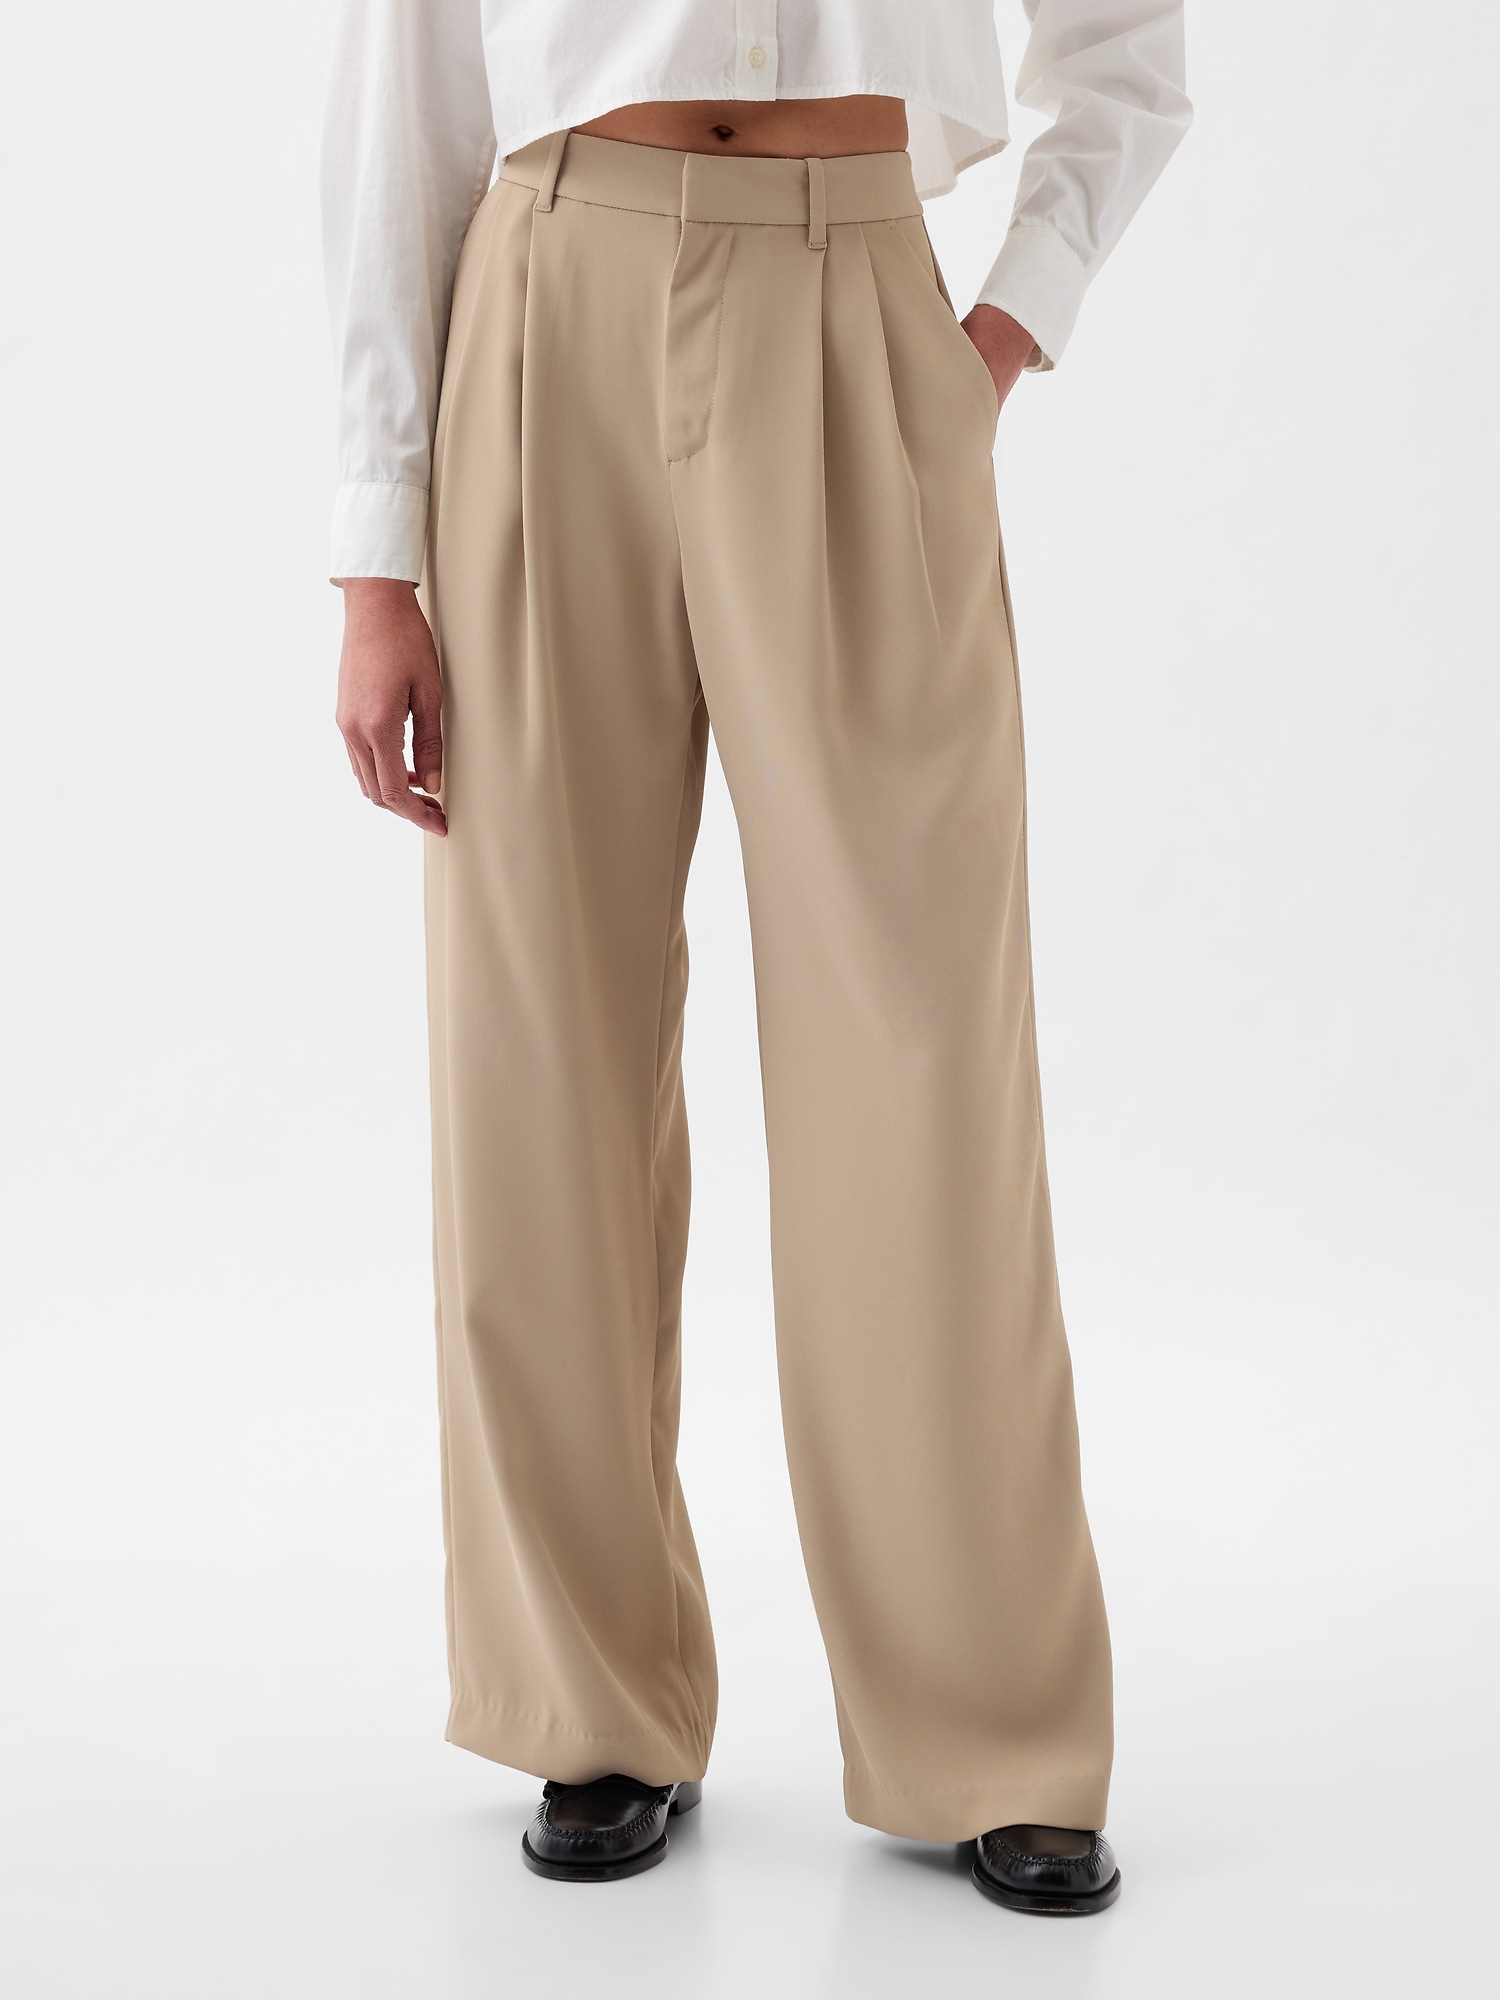 RYRJJ Straight Wide Leg Long Trousers with Tie Belt for Women Pleated Front  High Waisted Business Work Pants Elegant Dress Trousers(Beige,M) -  Walmart.com